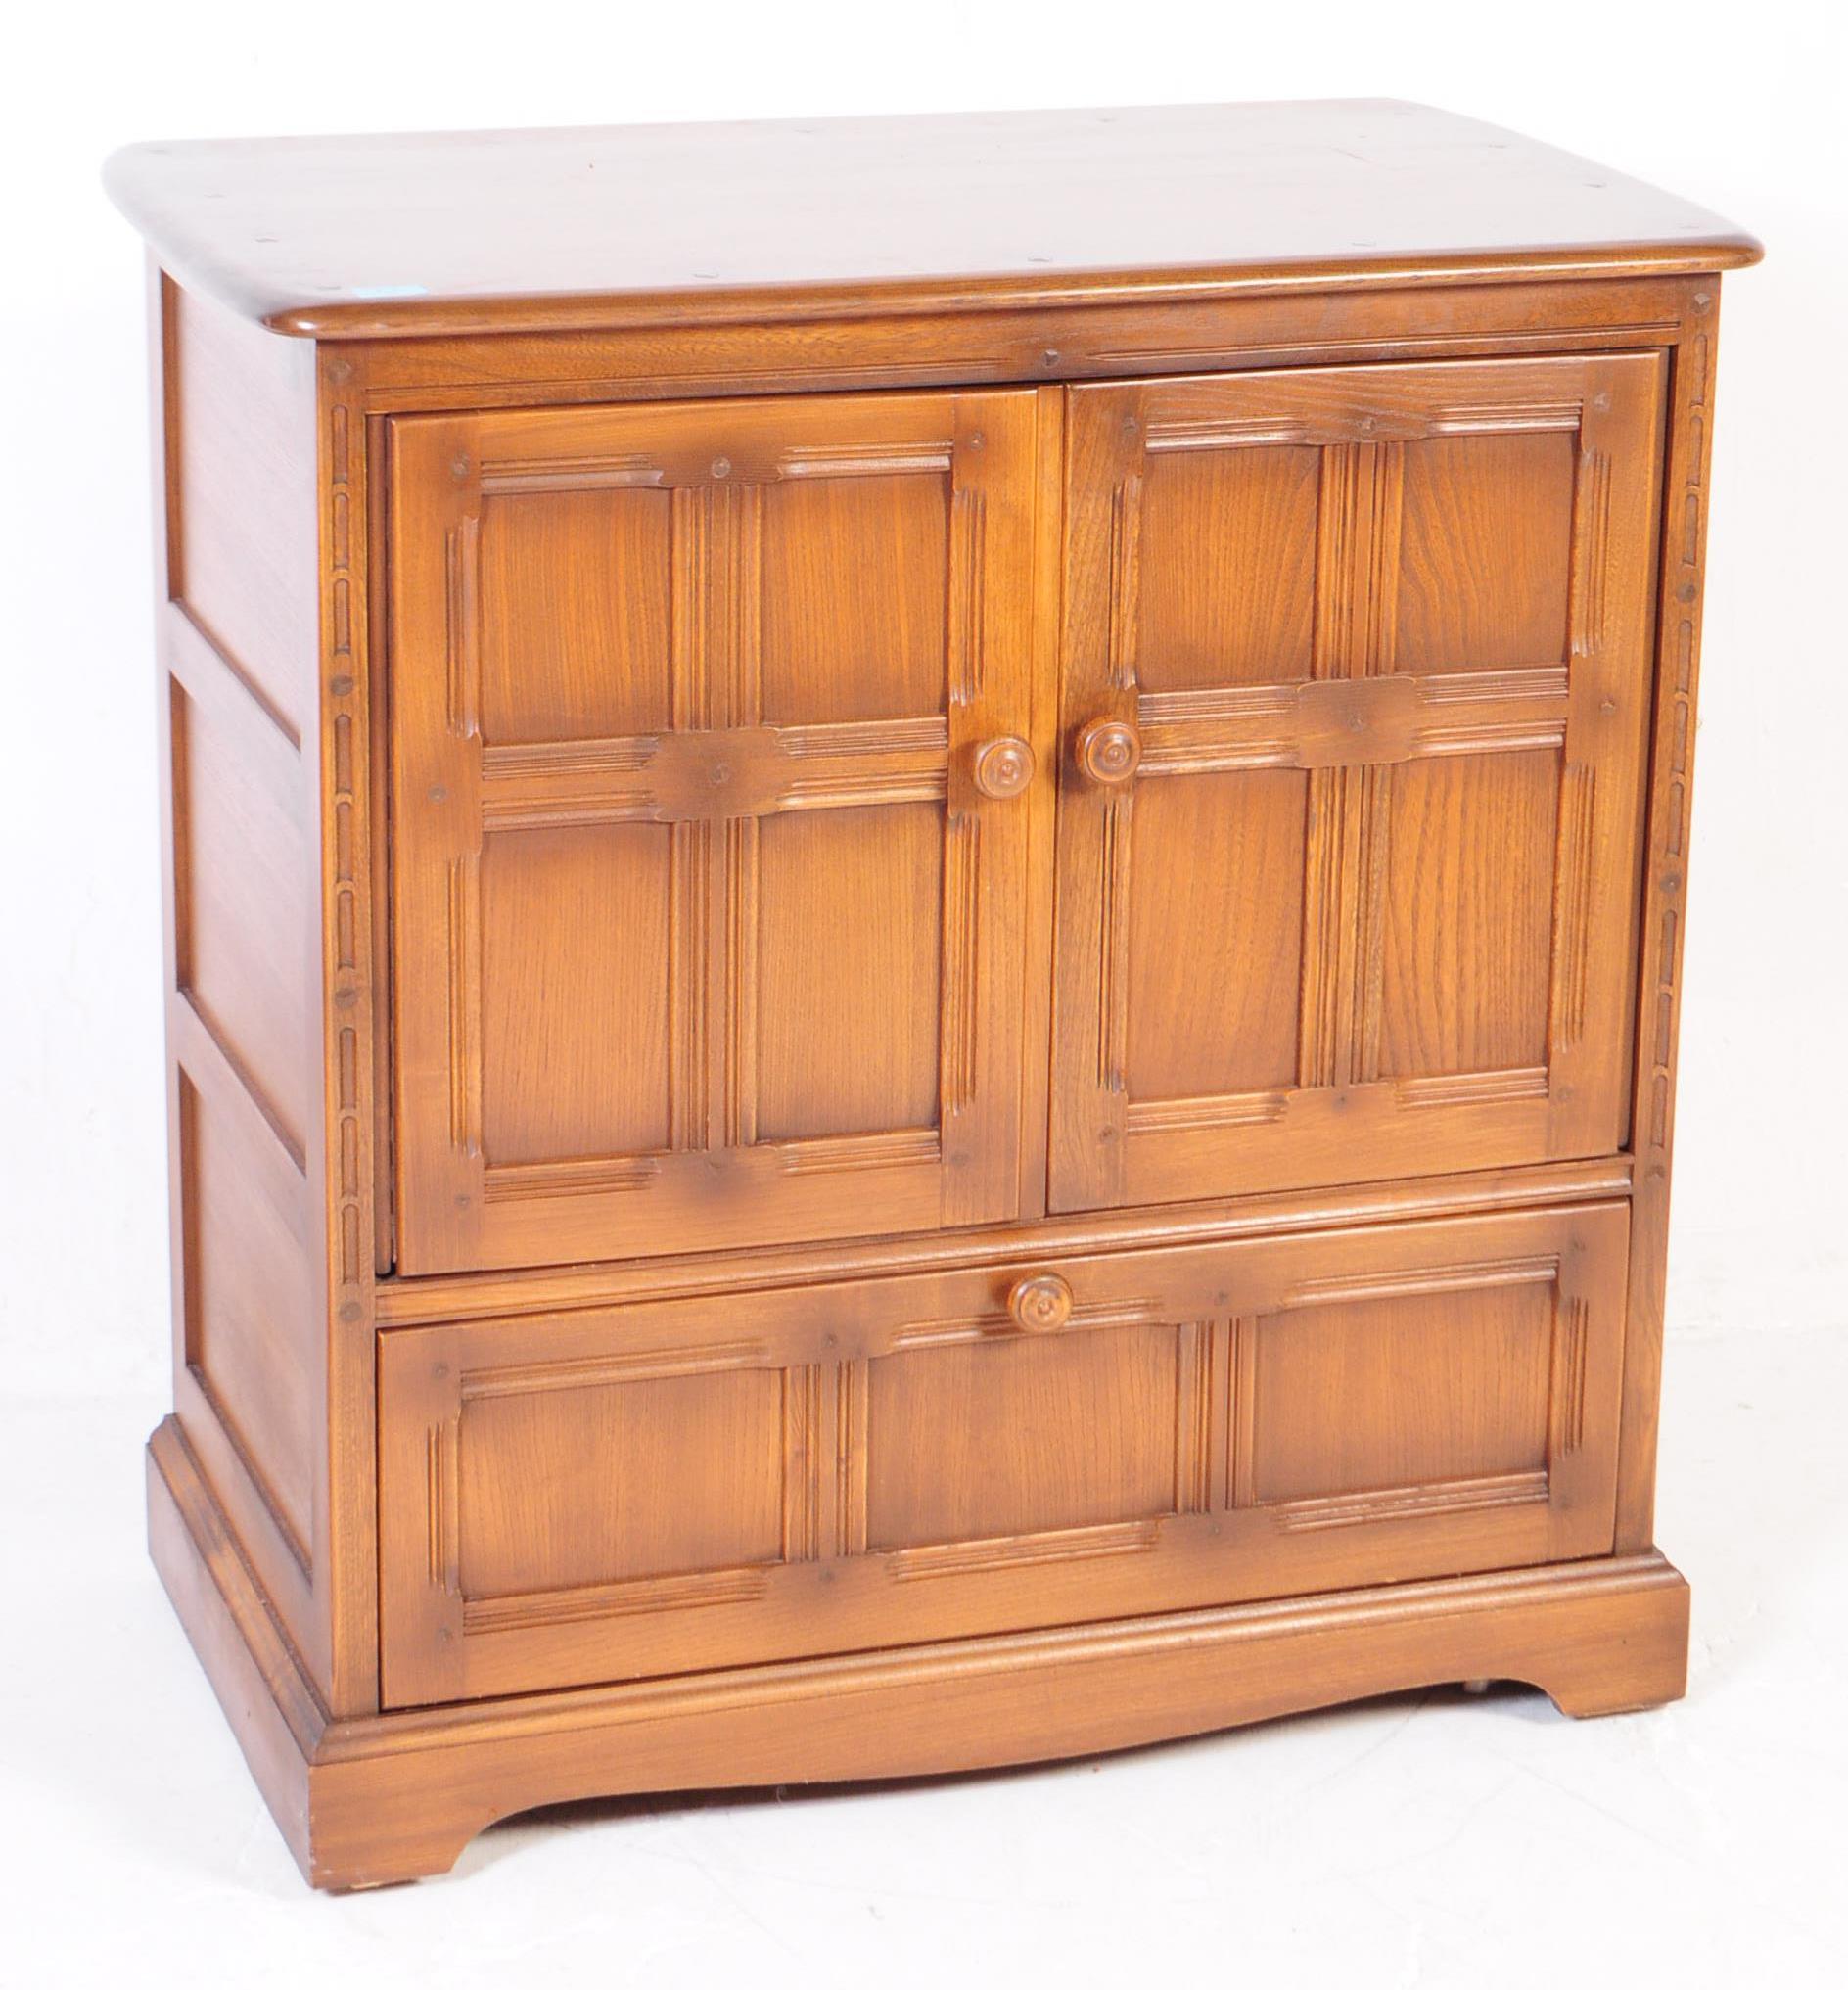 20TH CENTURY ERCOL GOLDEN DAWN ELM TV DRINKS CABINET - Image 2 of 6